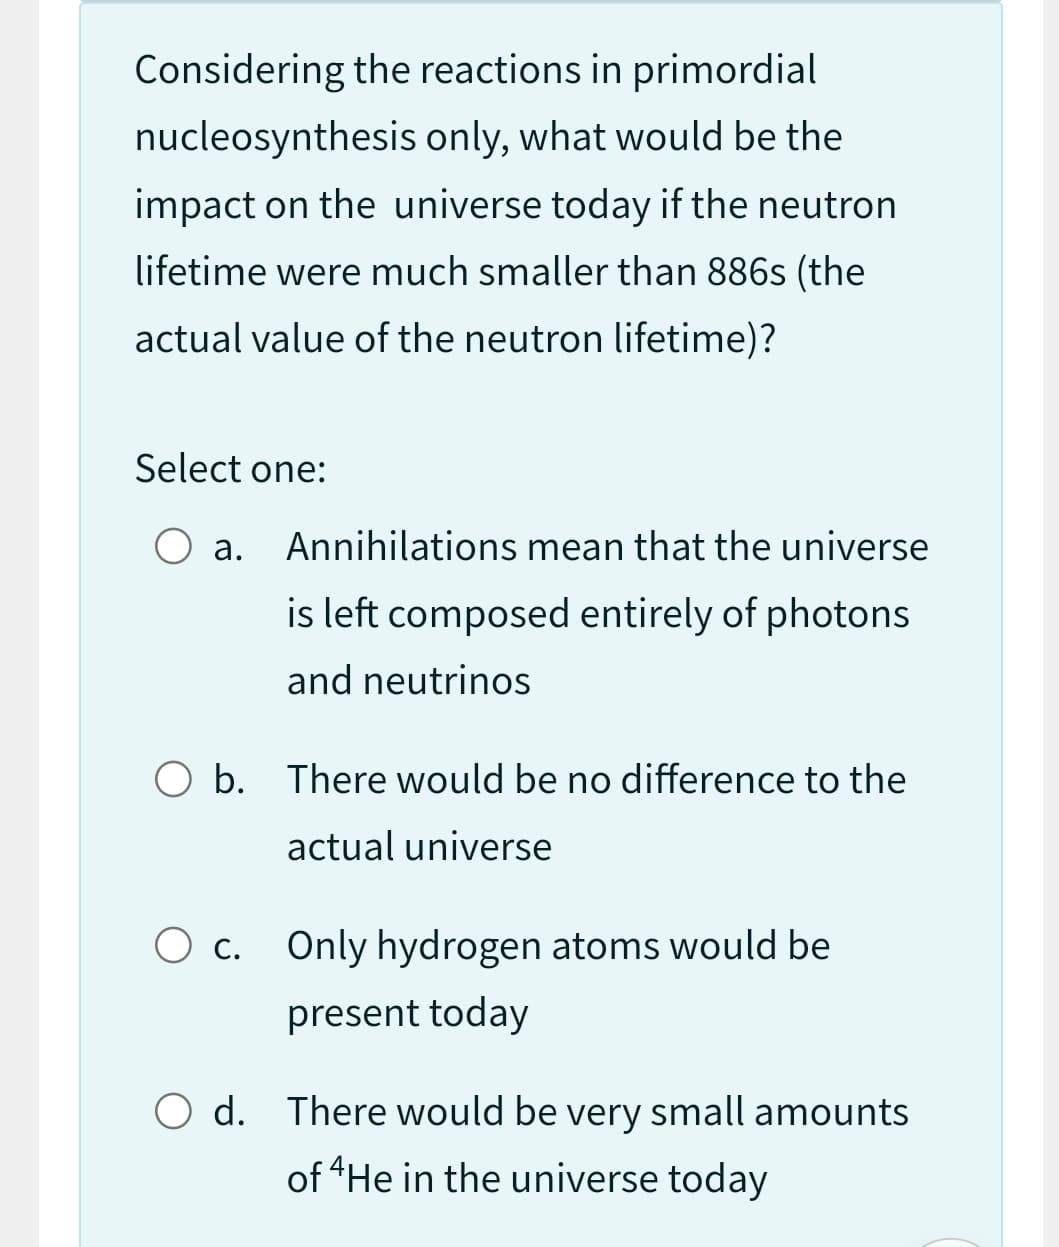 Considering the reactions in primordial
nucleosynthesis only, what would be the
impact on the universe today if the neutron
lifetime were much smaller than 886s (the
actual value of the neutron lifetime)?
Select one:
O a. Annihilations mean that the universe
is left composed entirely of photons
and neutrinos
O b. There would be no difference to the
actual universe
O c. Only hydrogen atoms would be
present today
O d. There would be very small amounts
of 4He in the universe today